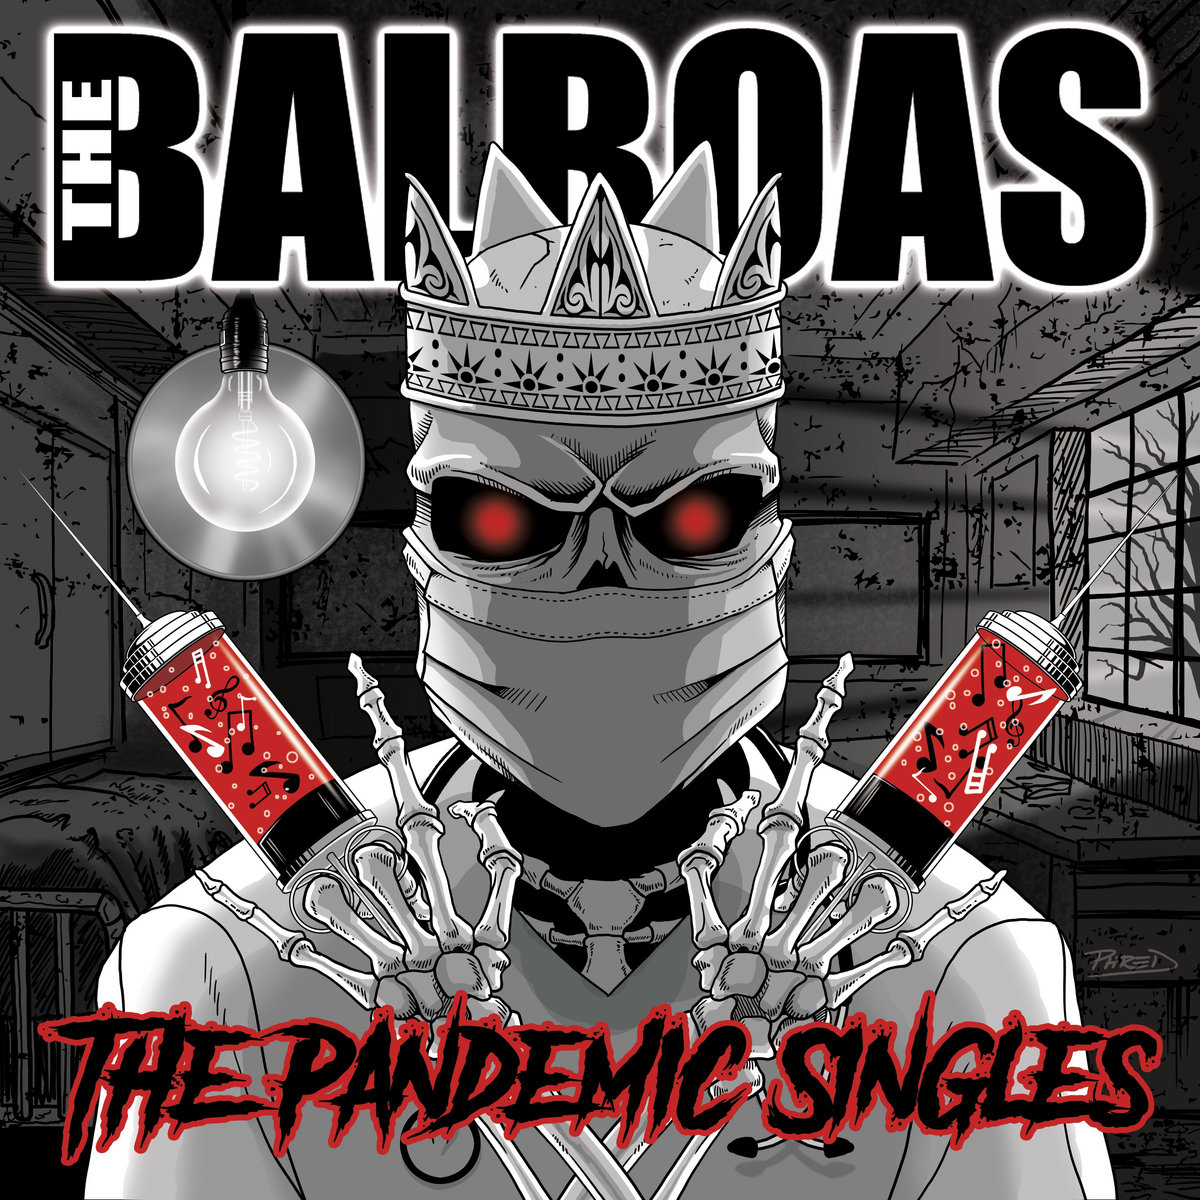 the pandemic singles cover art by Phred Rawles for the surf punk band The Balboas